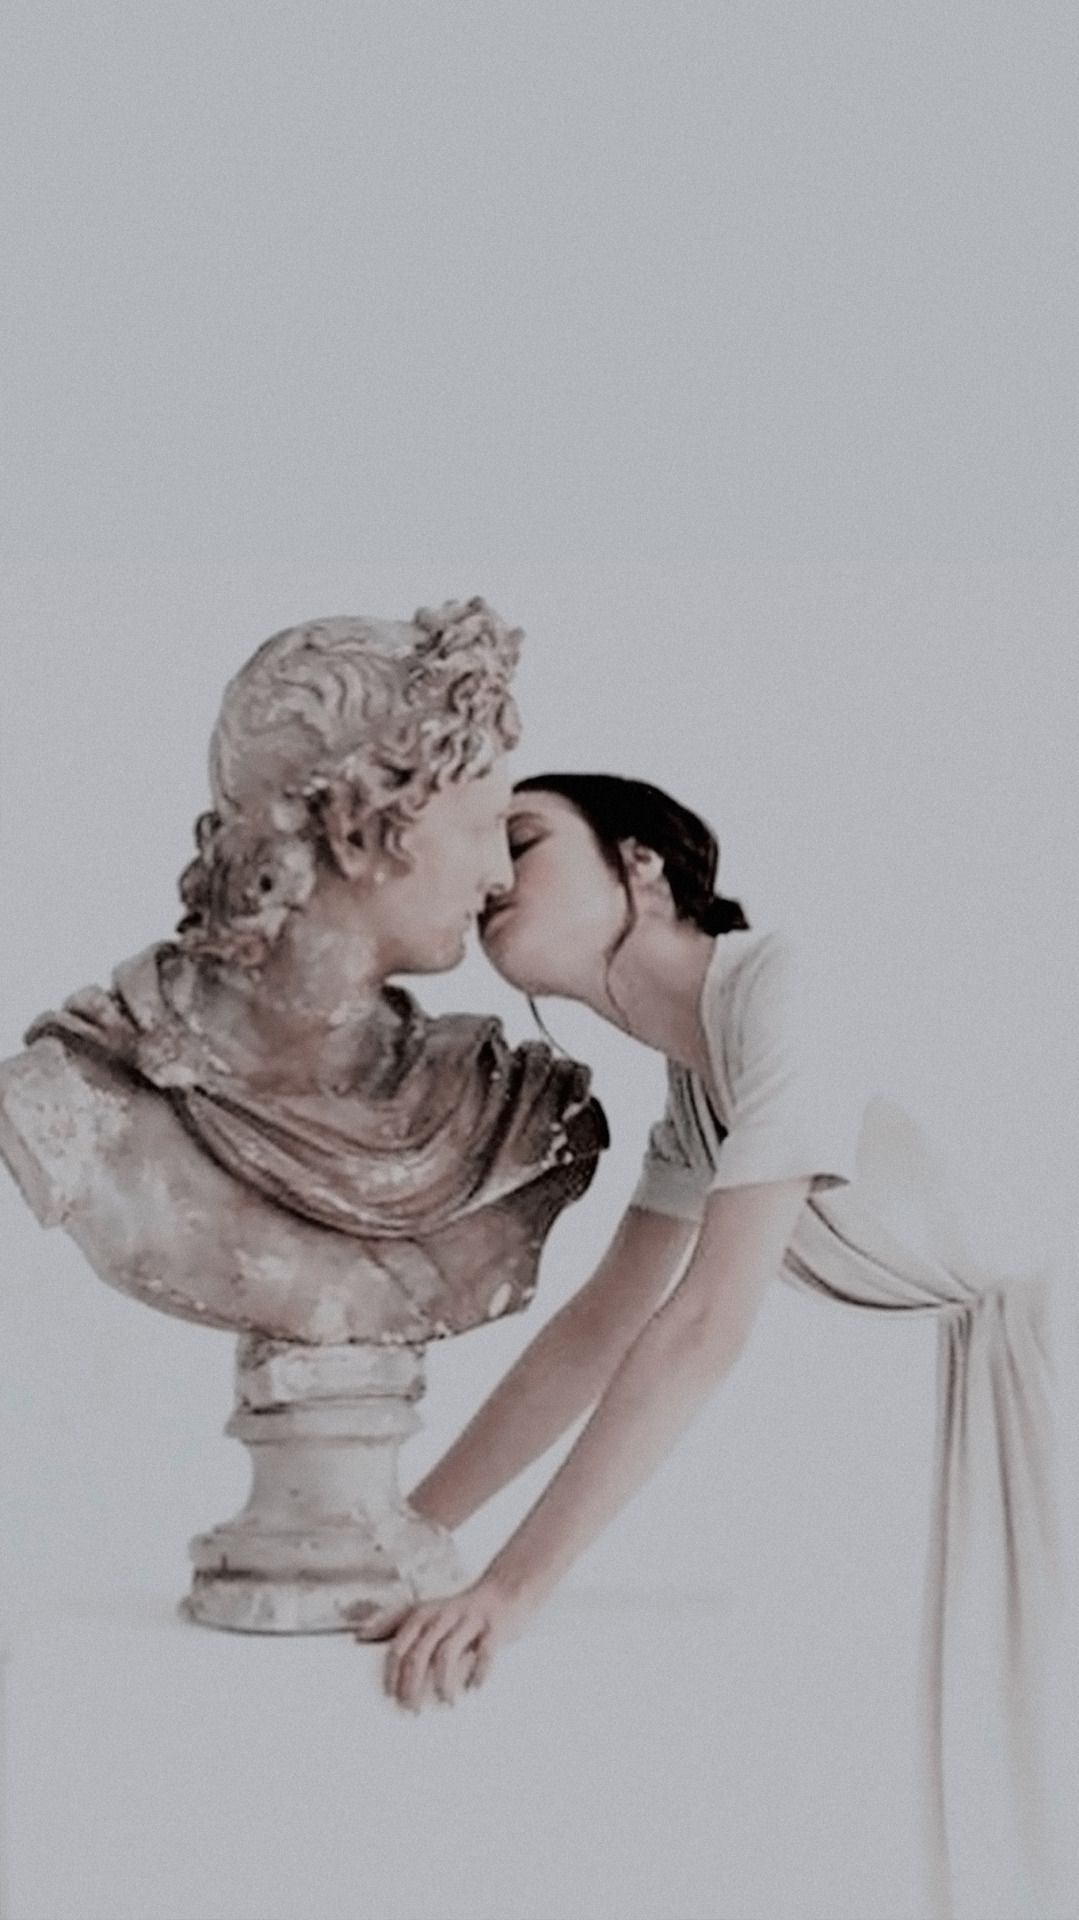 A woman kissing the head of an ancient statue - Greek mythology